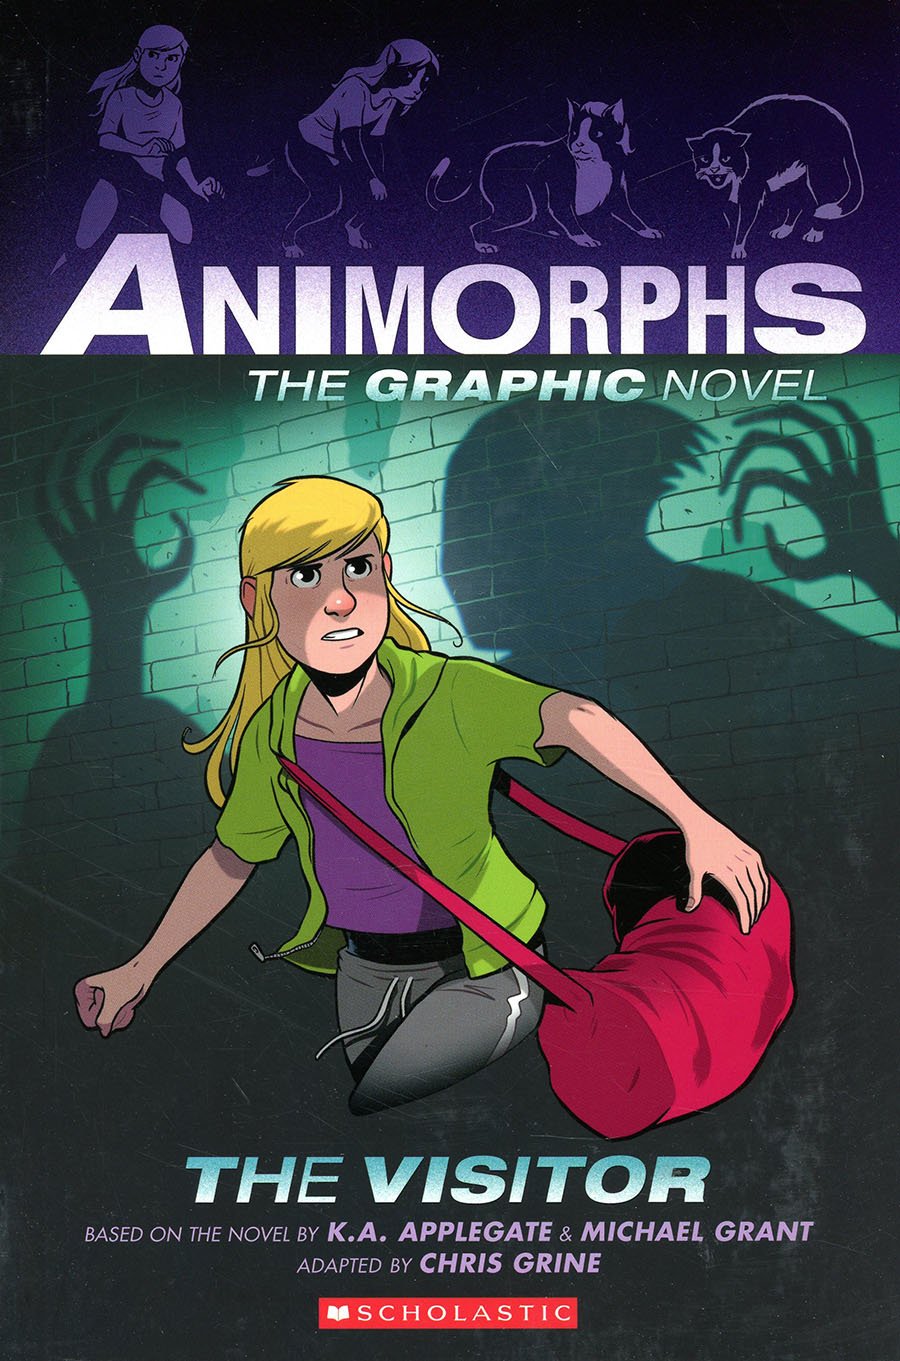 Animorphs The Graphic Novel Vol 2 The Visitor TP